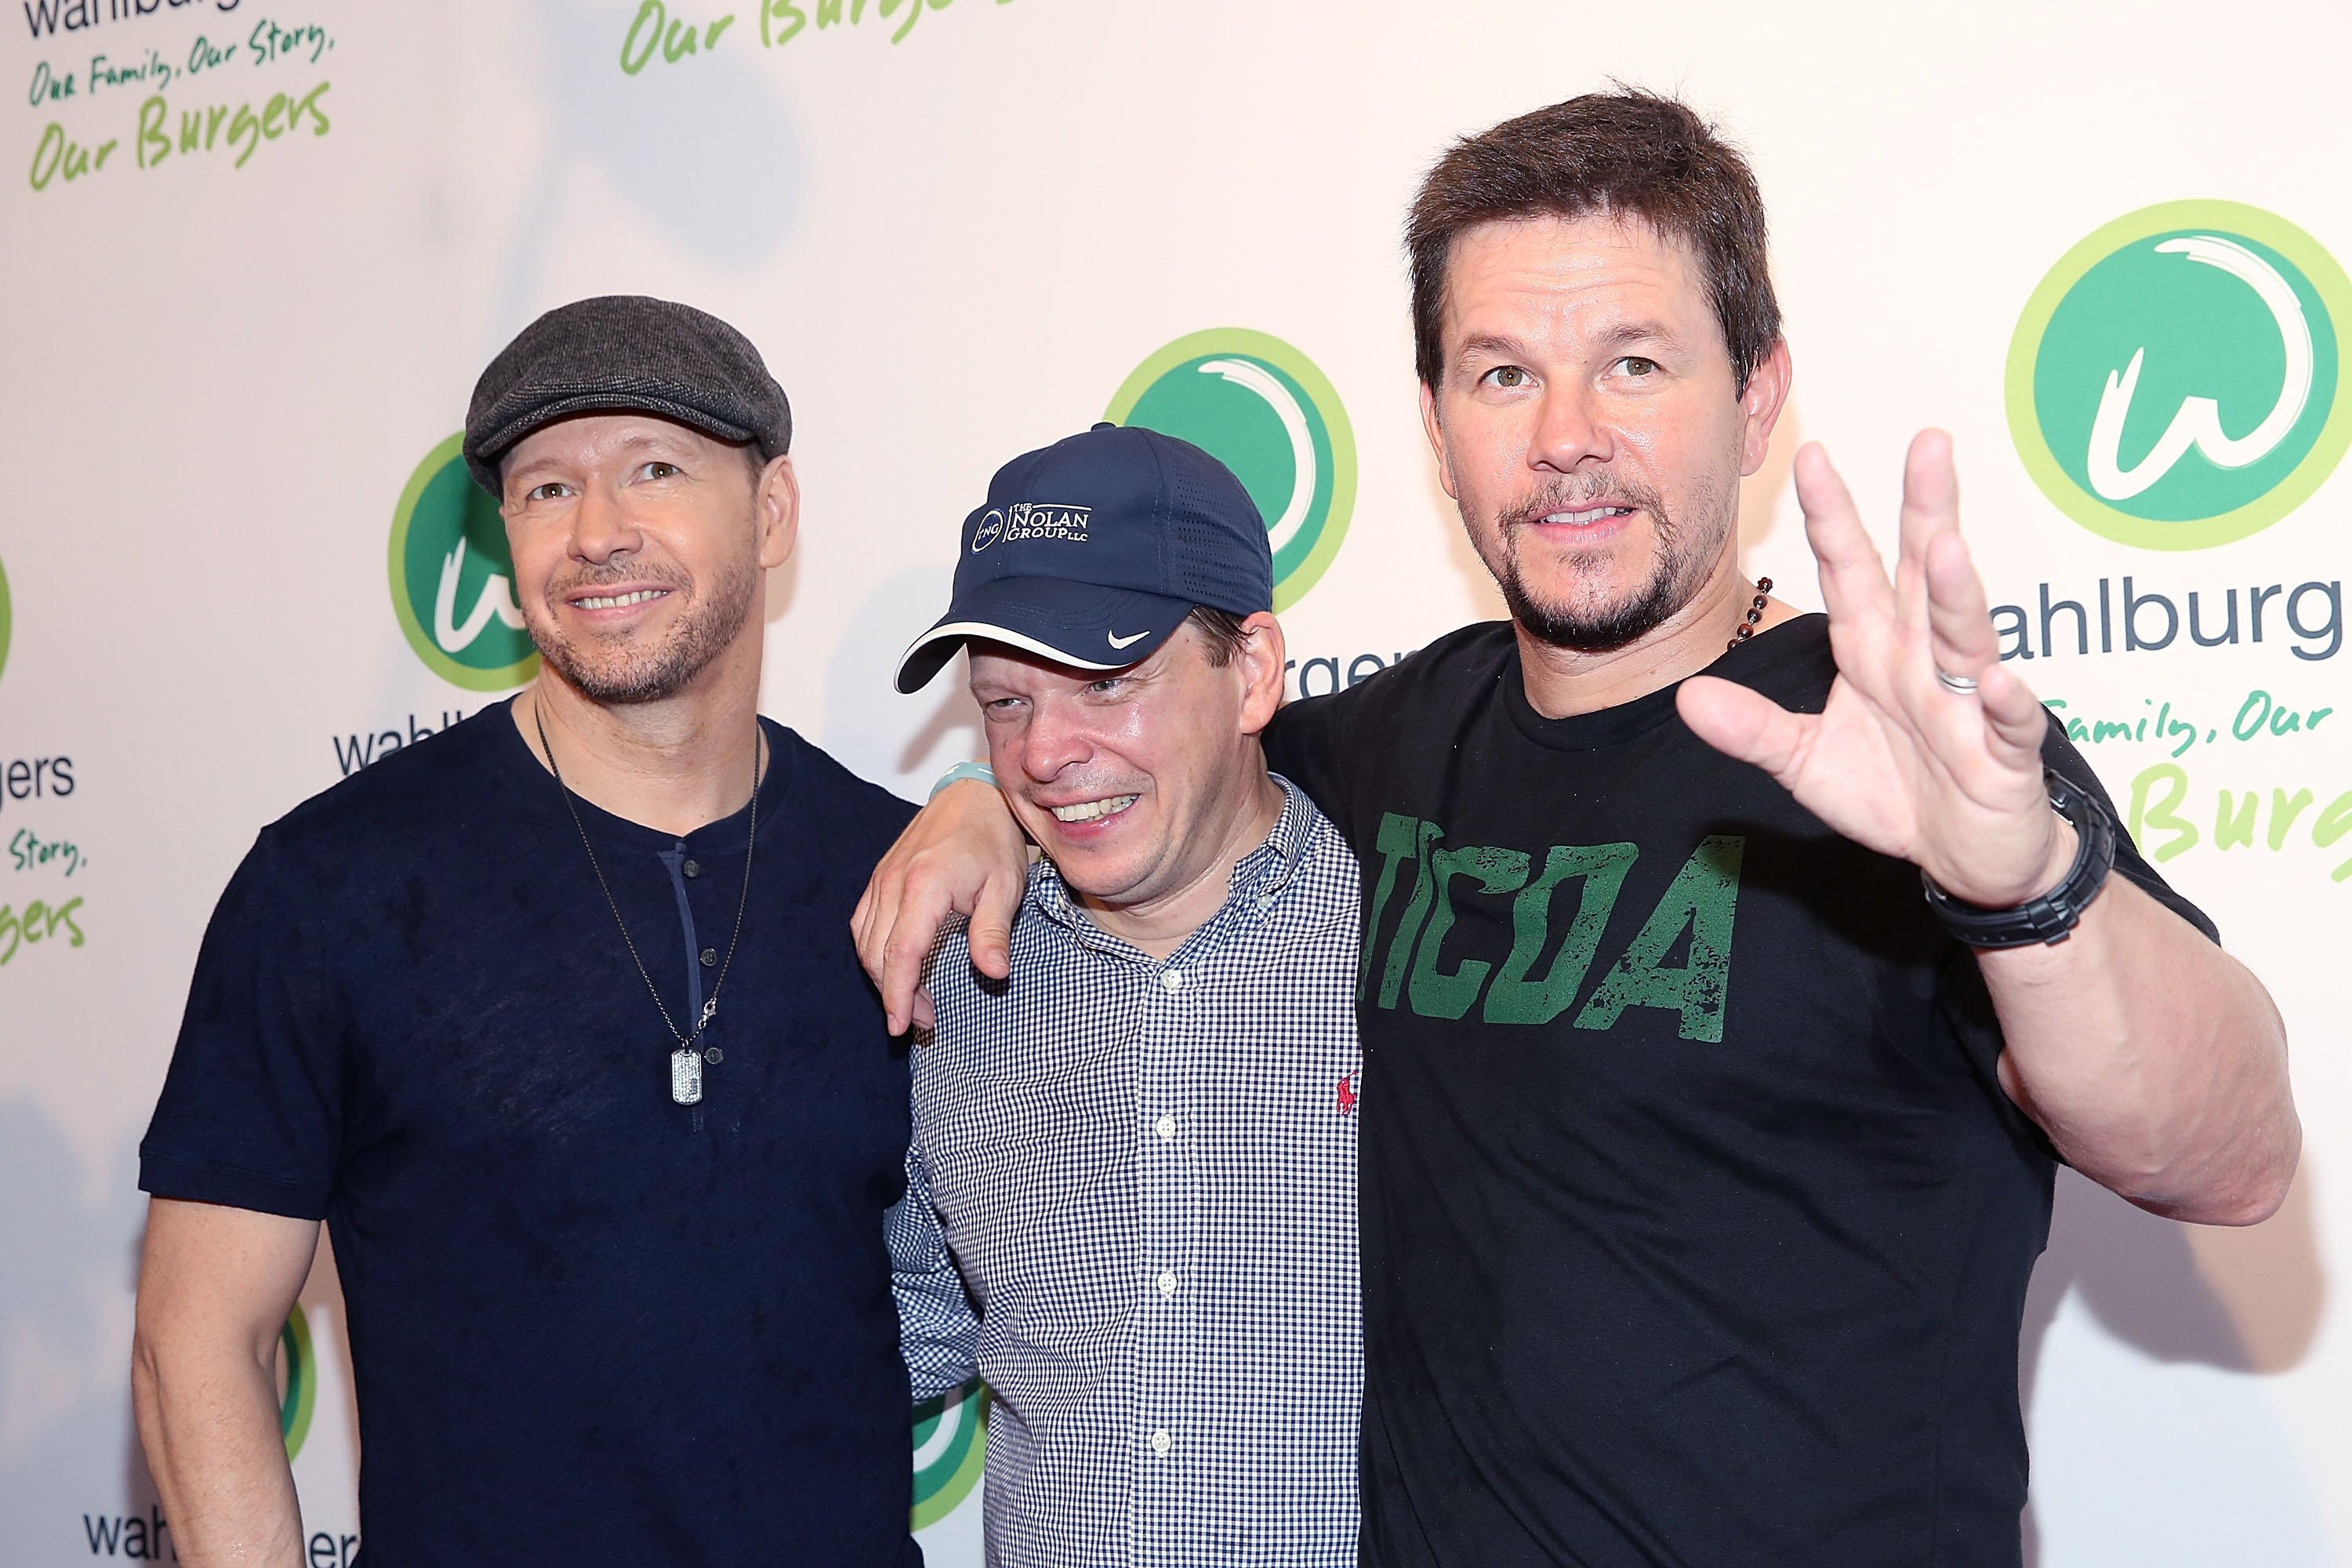 Donnie Wahlberg, Paul Wahlberg and Mark Wahlberg at the Wahlburgers Coney Island VIP Preview Party on June 23, 2015 in New York City. | Source: Getty Images